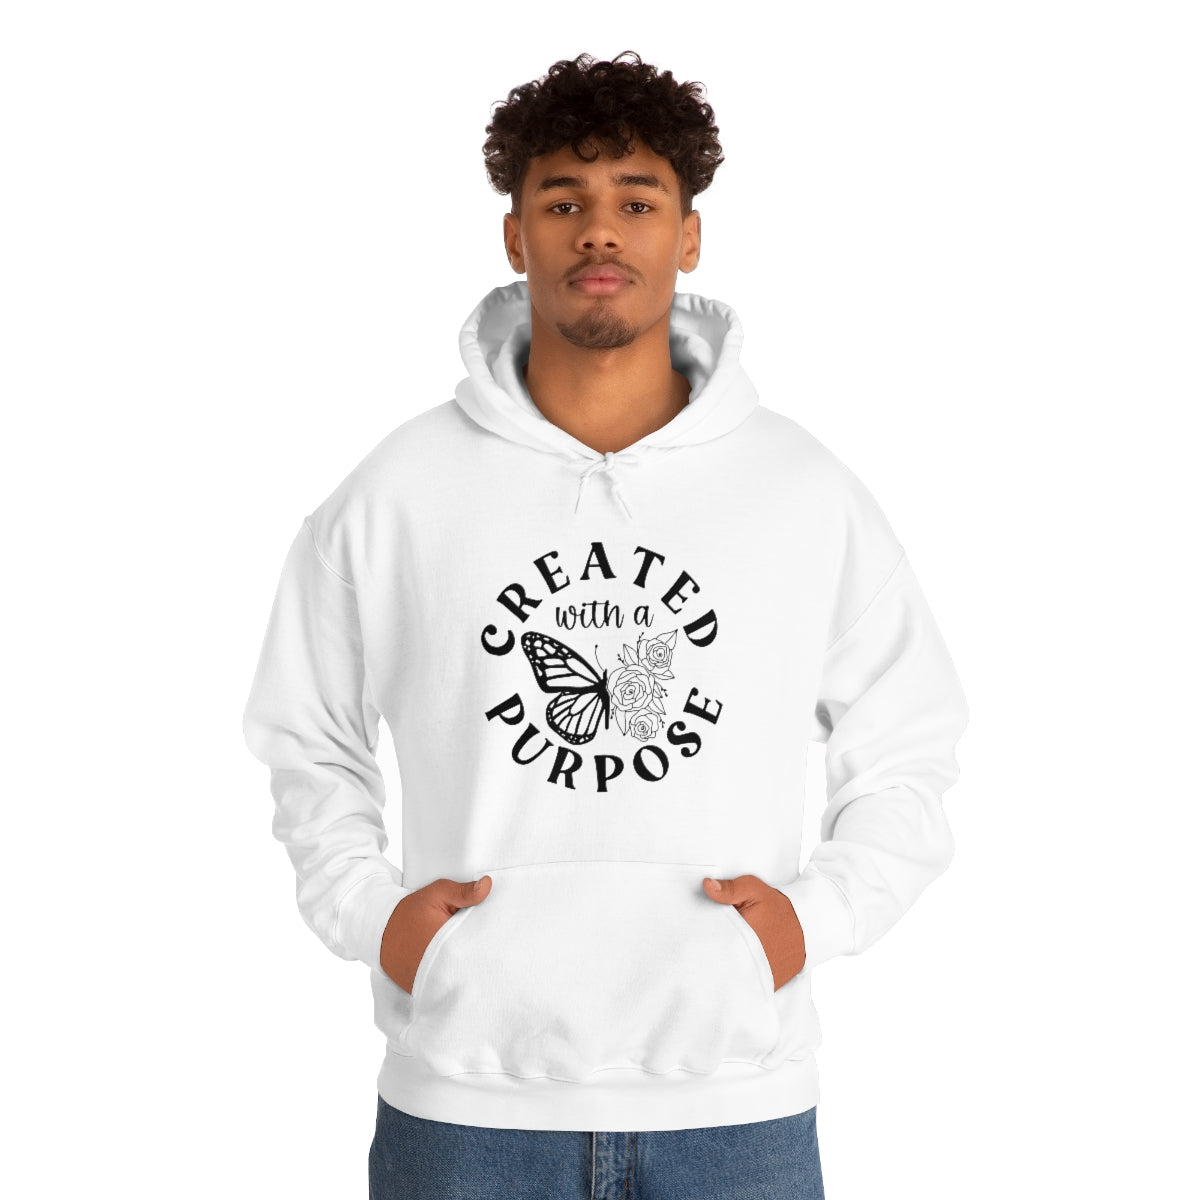 Created with a Purpose Unisex Heavy Blend™ Hooded Sweatshirt